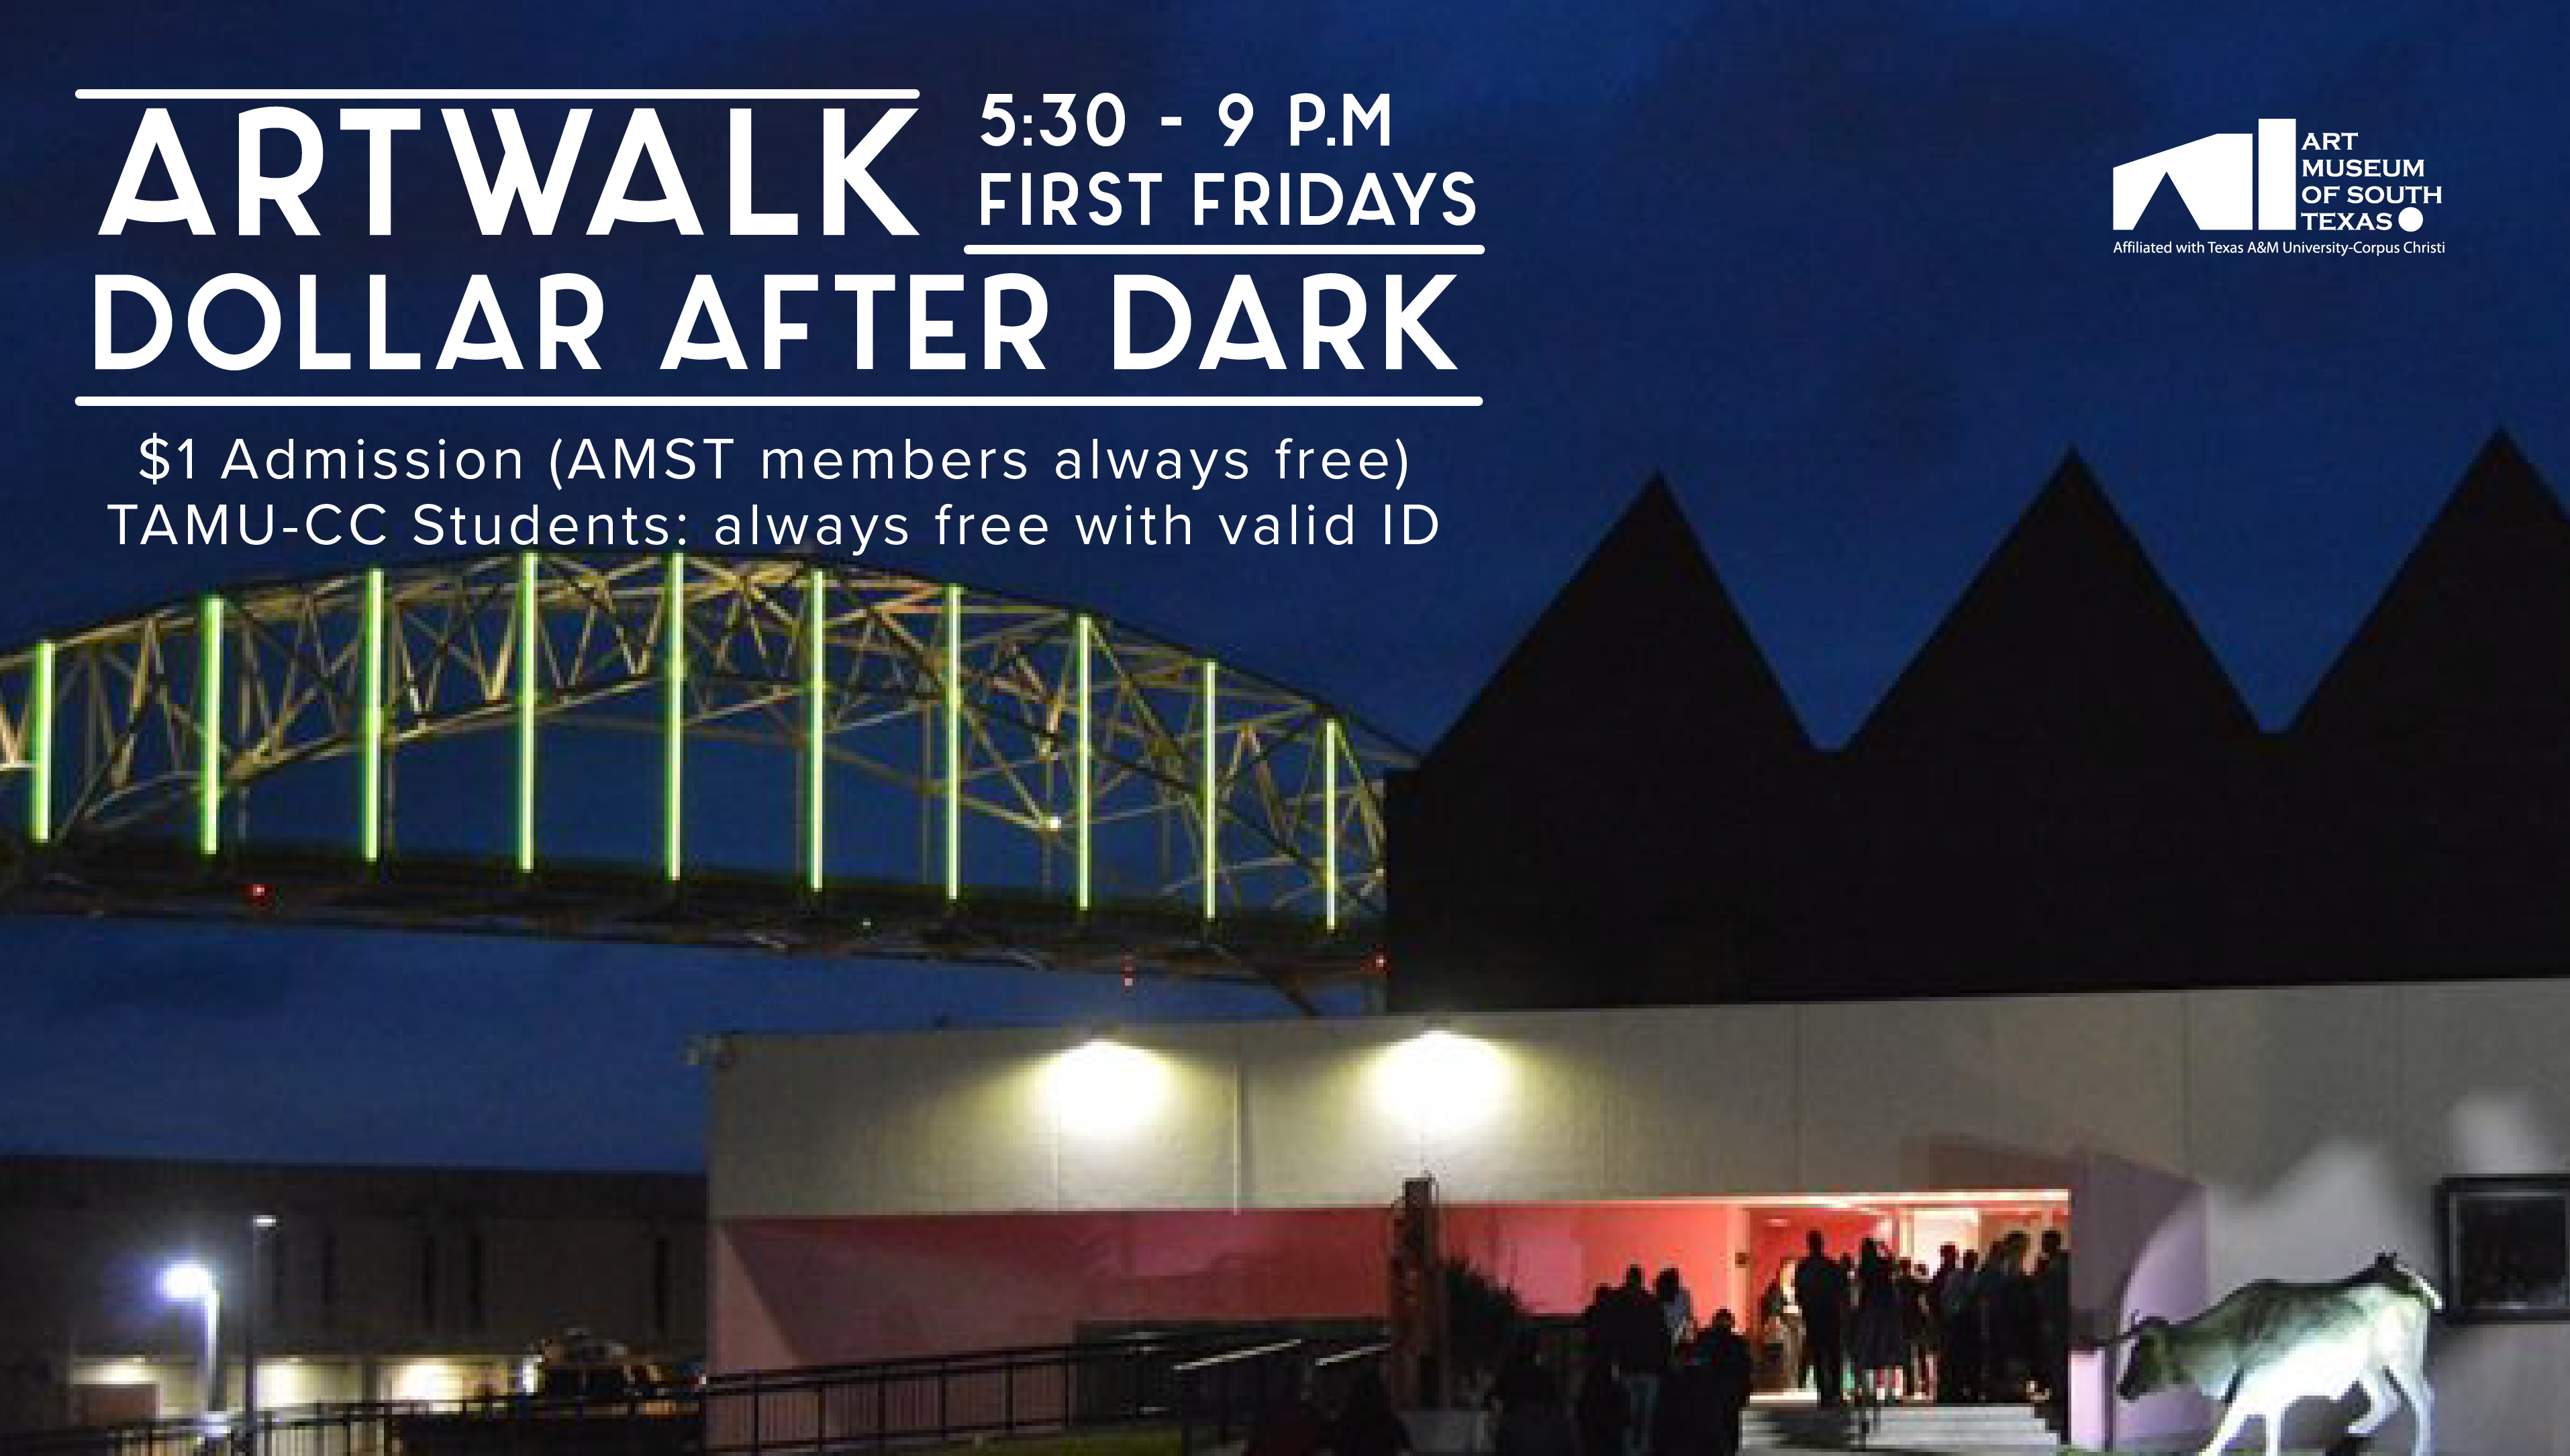 The Art Museum is open 5:30 - 9 p.m. for Dollar After Dark as part of the Marina Art District's ARTWALK. Enjoy reduced admission of $1 per person, stroll the galleries, and experience an architectural landmark!